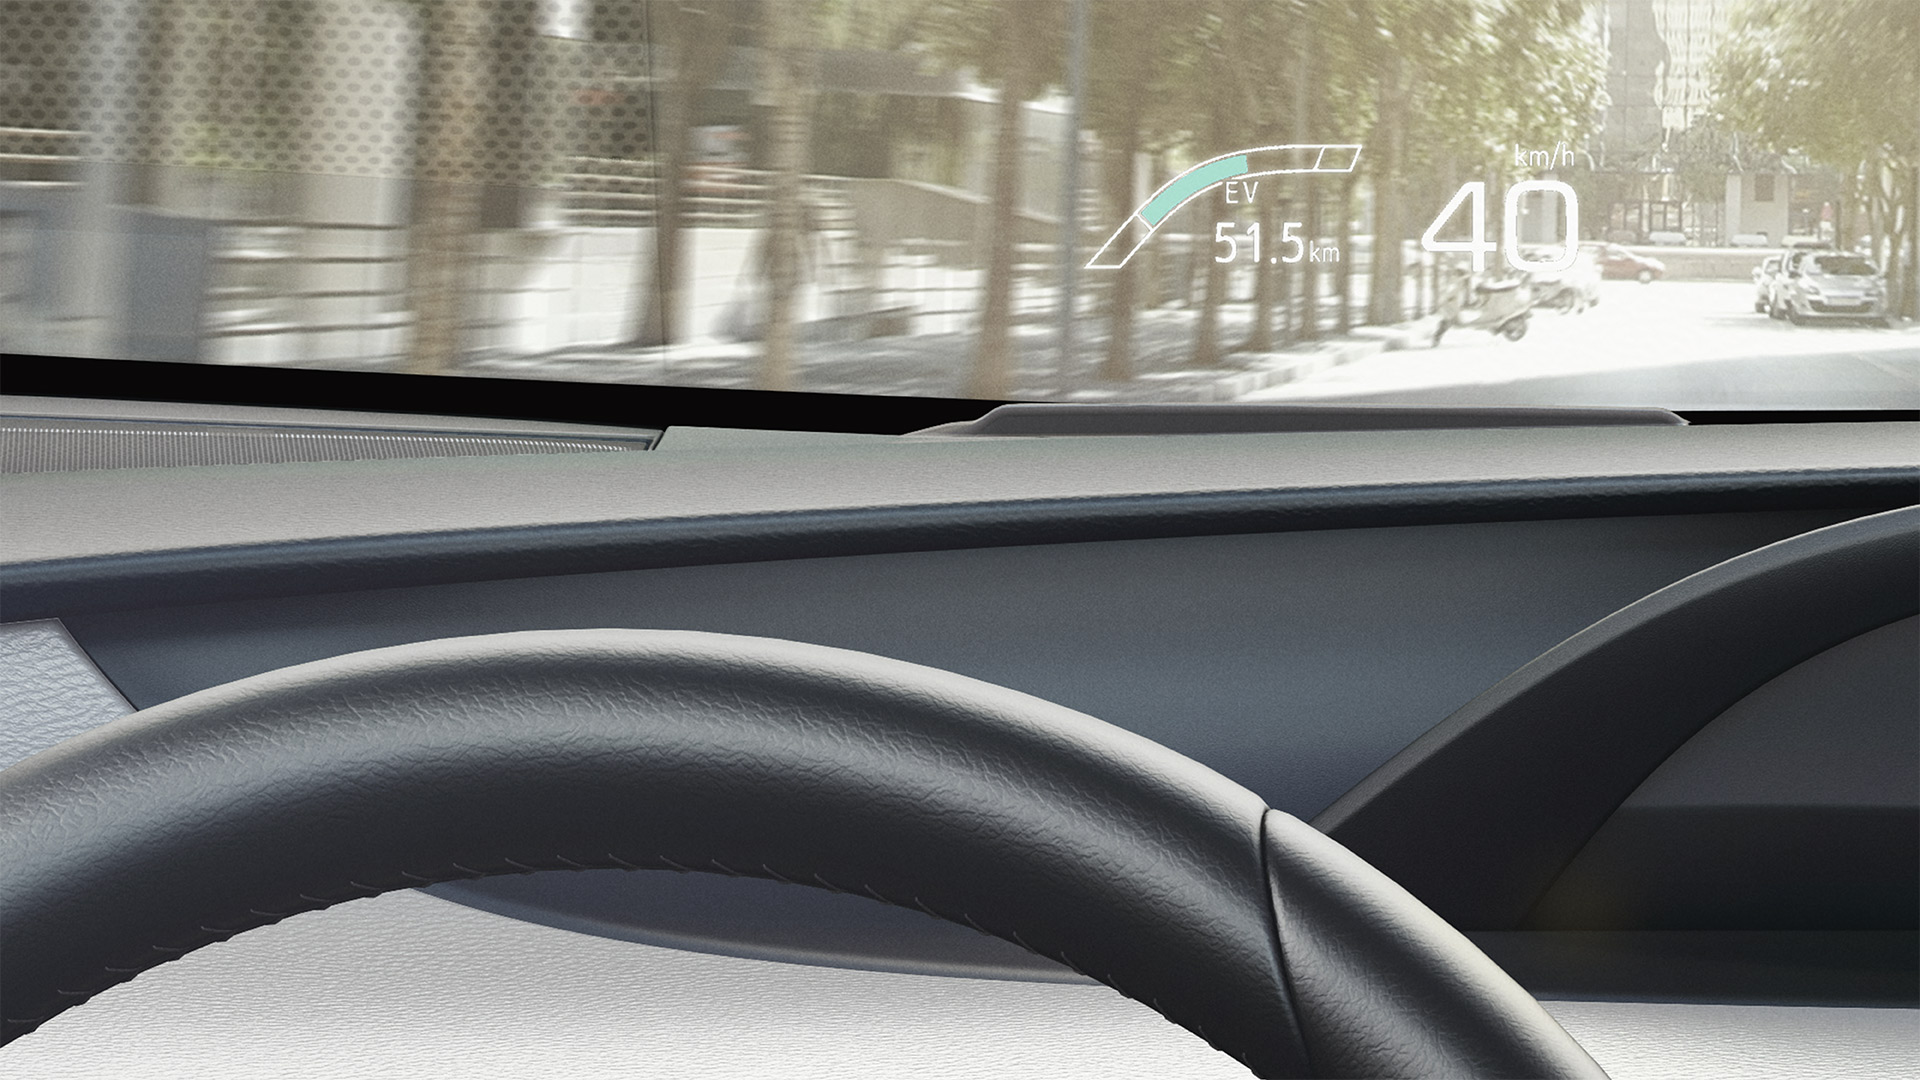 The Head Up Display is positioned clearly at the base of the windscreen